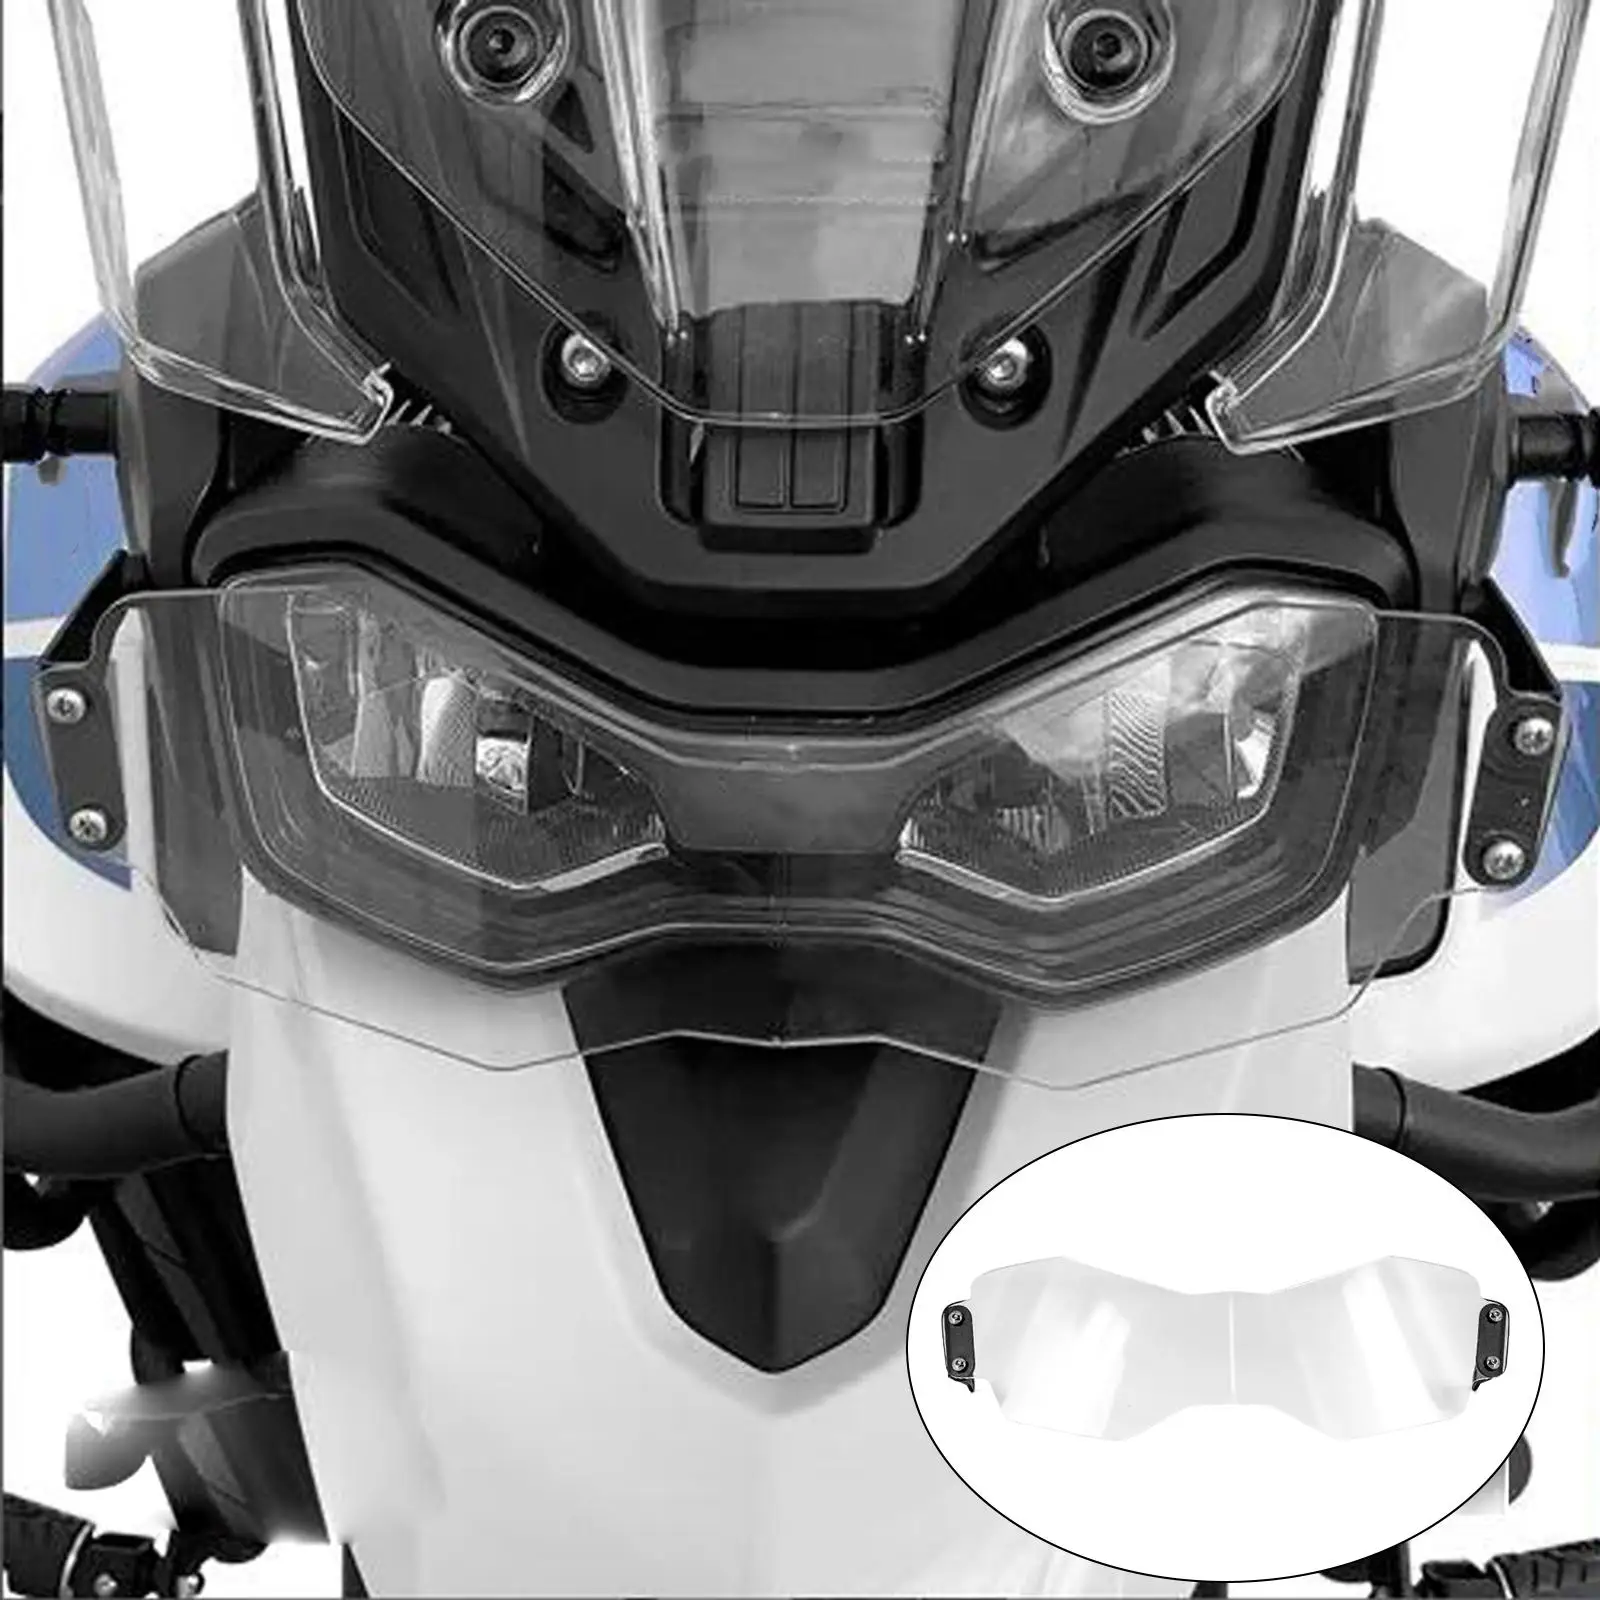 Acrylic Motorcycle Headlight Protector Guard Cover Fits for  900 20-22